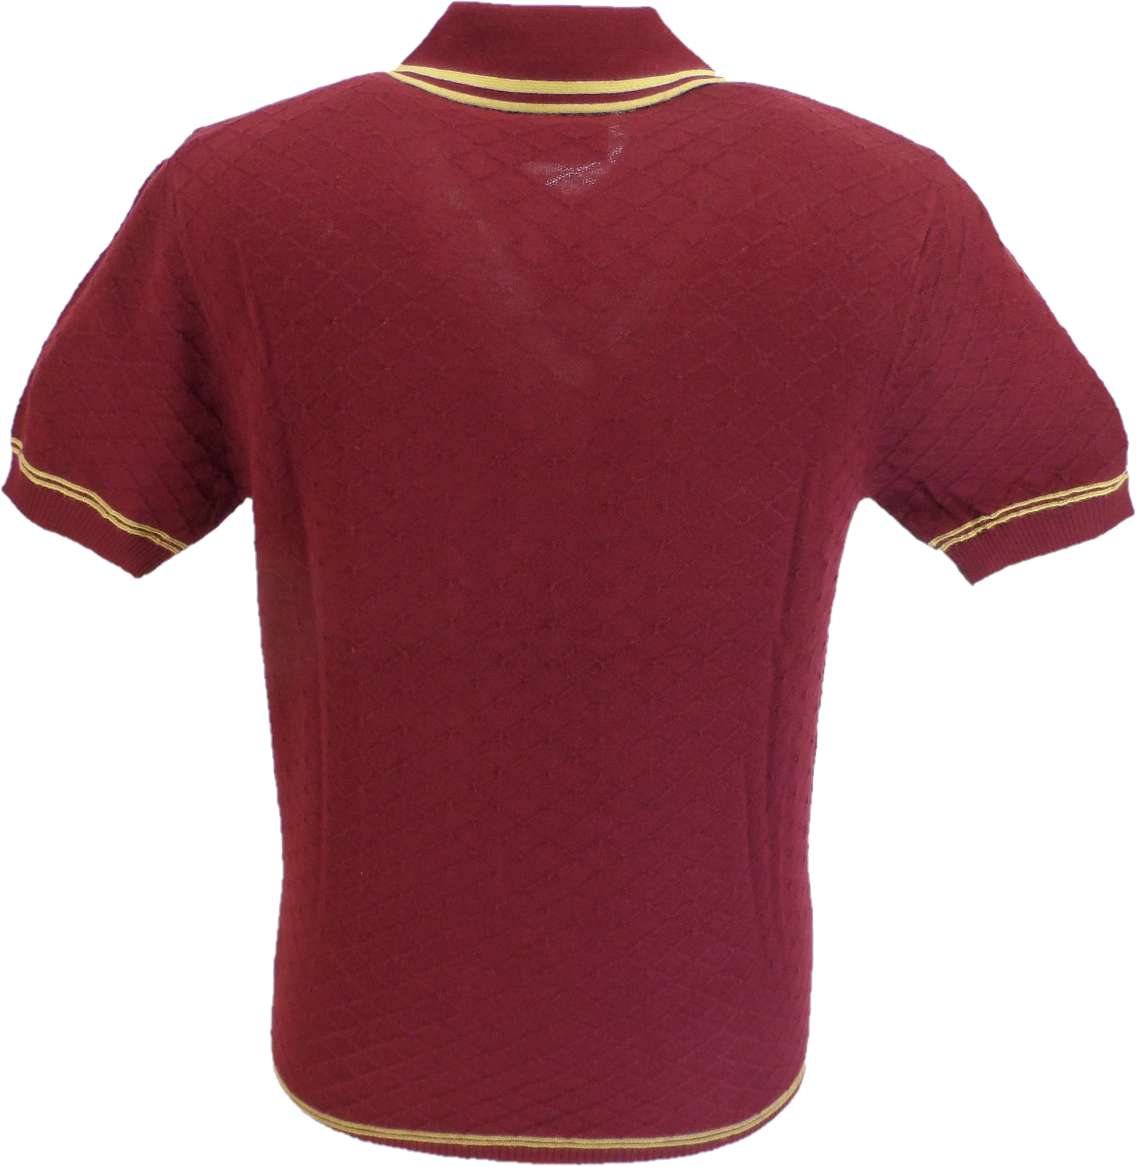 Art Gallery Mens Mcgriff Wine/Gold Knitted Polo